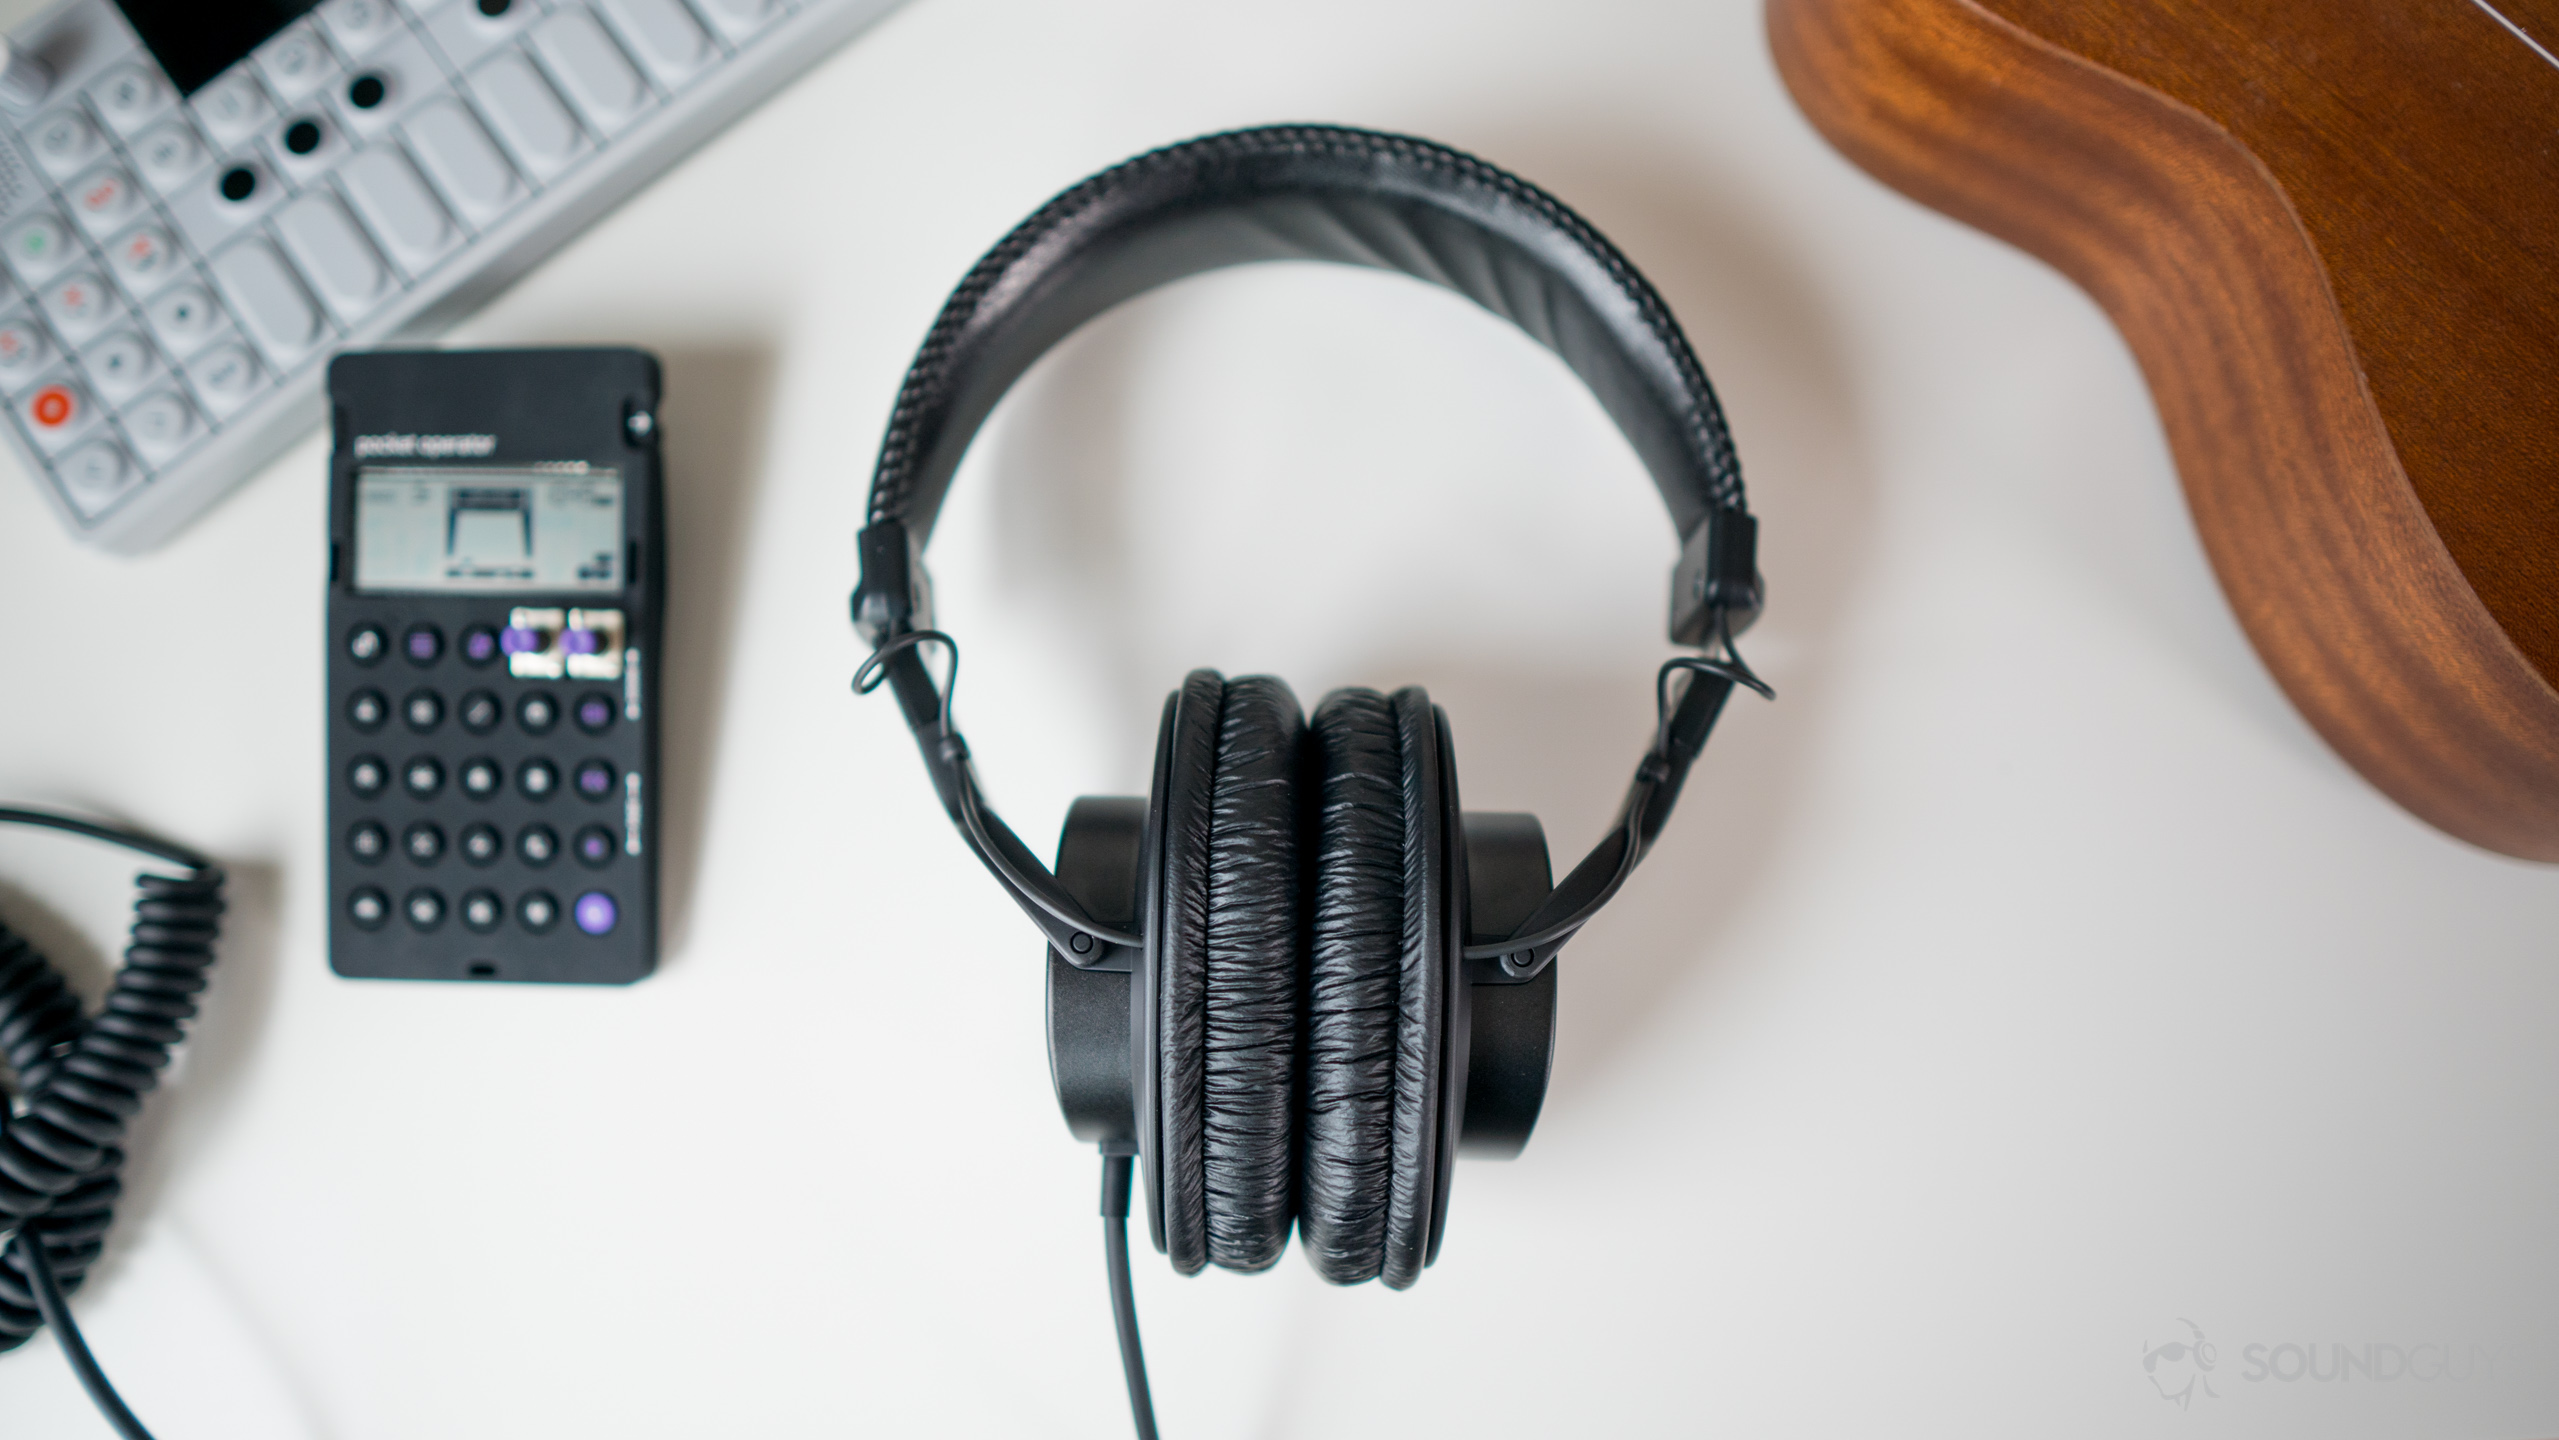 When it comes to smartphone audio, it's most important to find the right tool for the right job